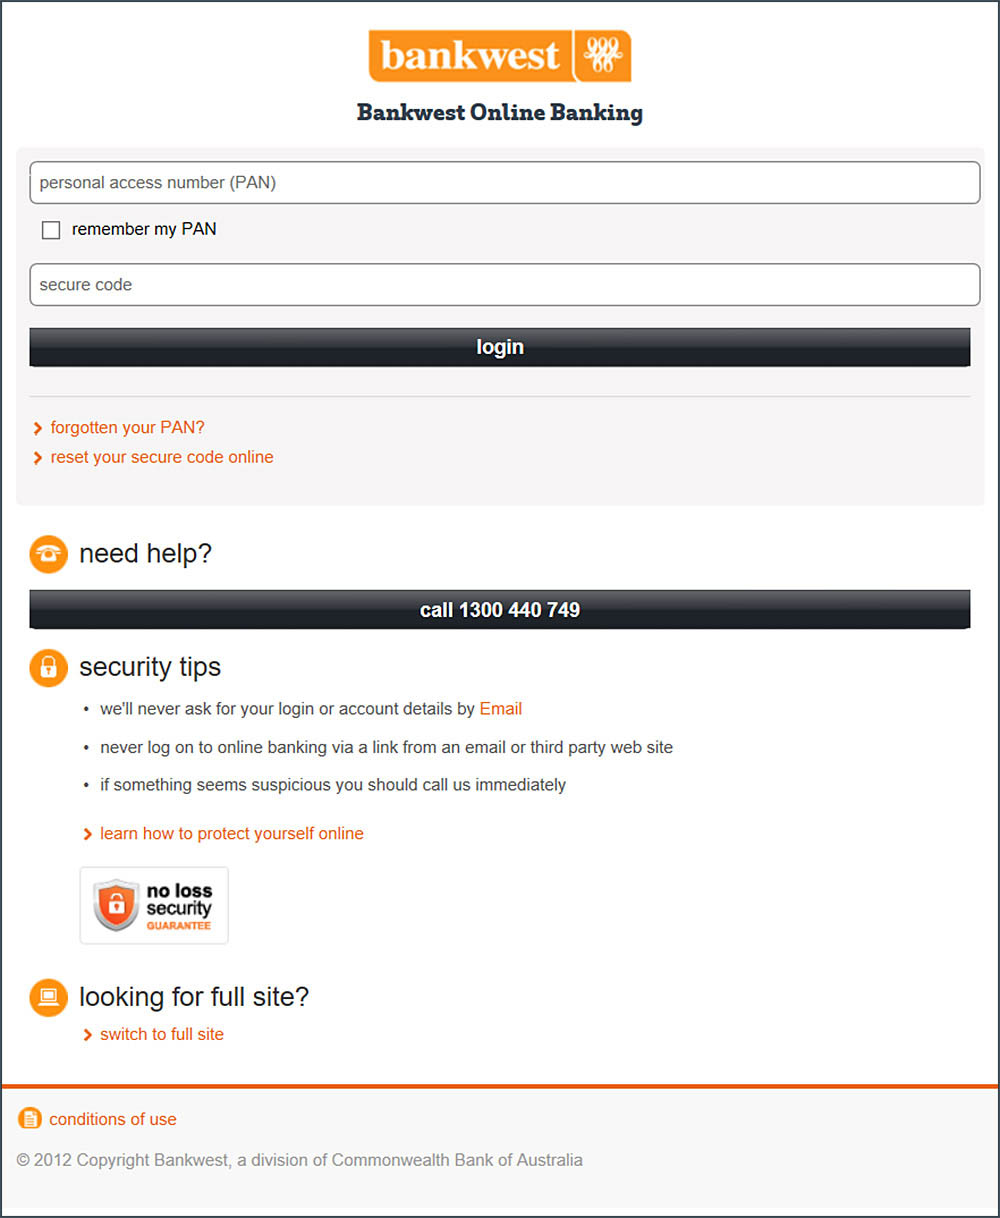 Image example of a fake Bankwest Online Banking login mobile page